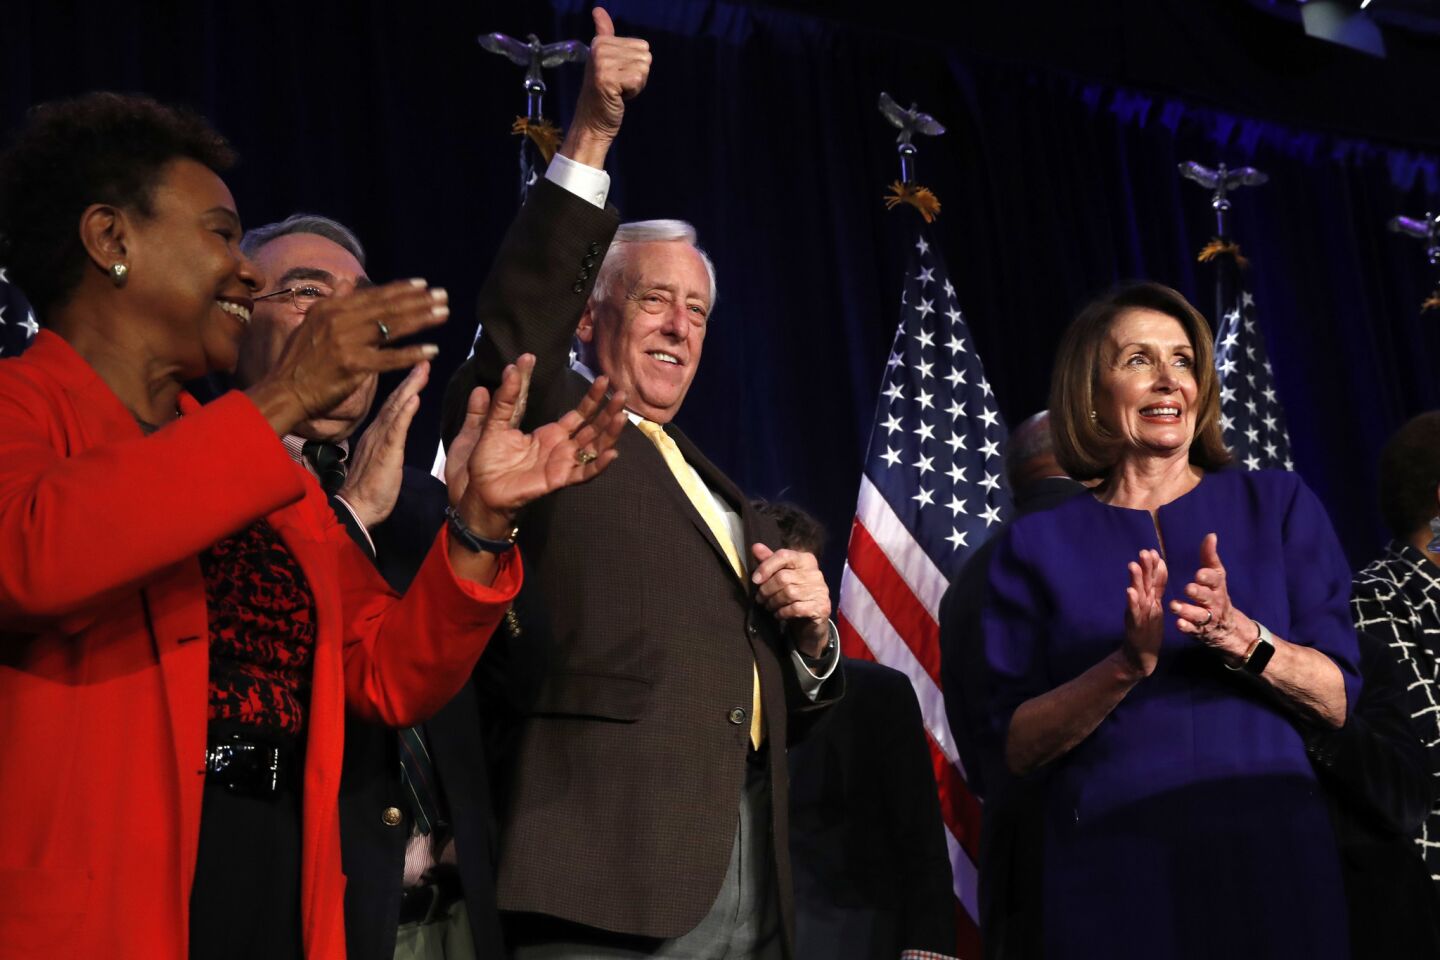 House Minority Leader Nancy Pelosi, right, and Minority Whip Steny H. Hoyer celebrate Tuesday's election result, which puts Pelosi in line to return to the speakership.